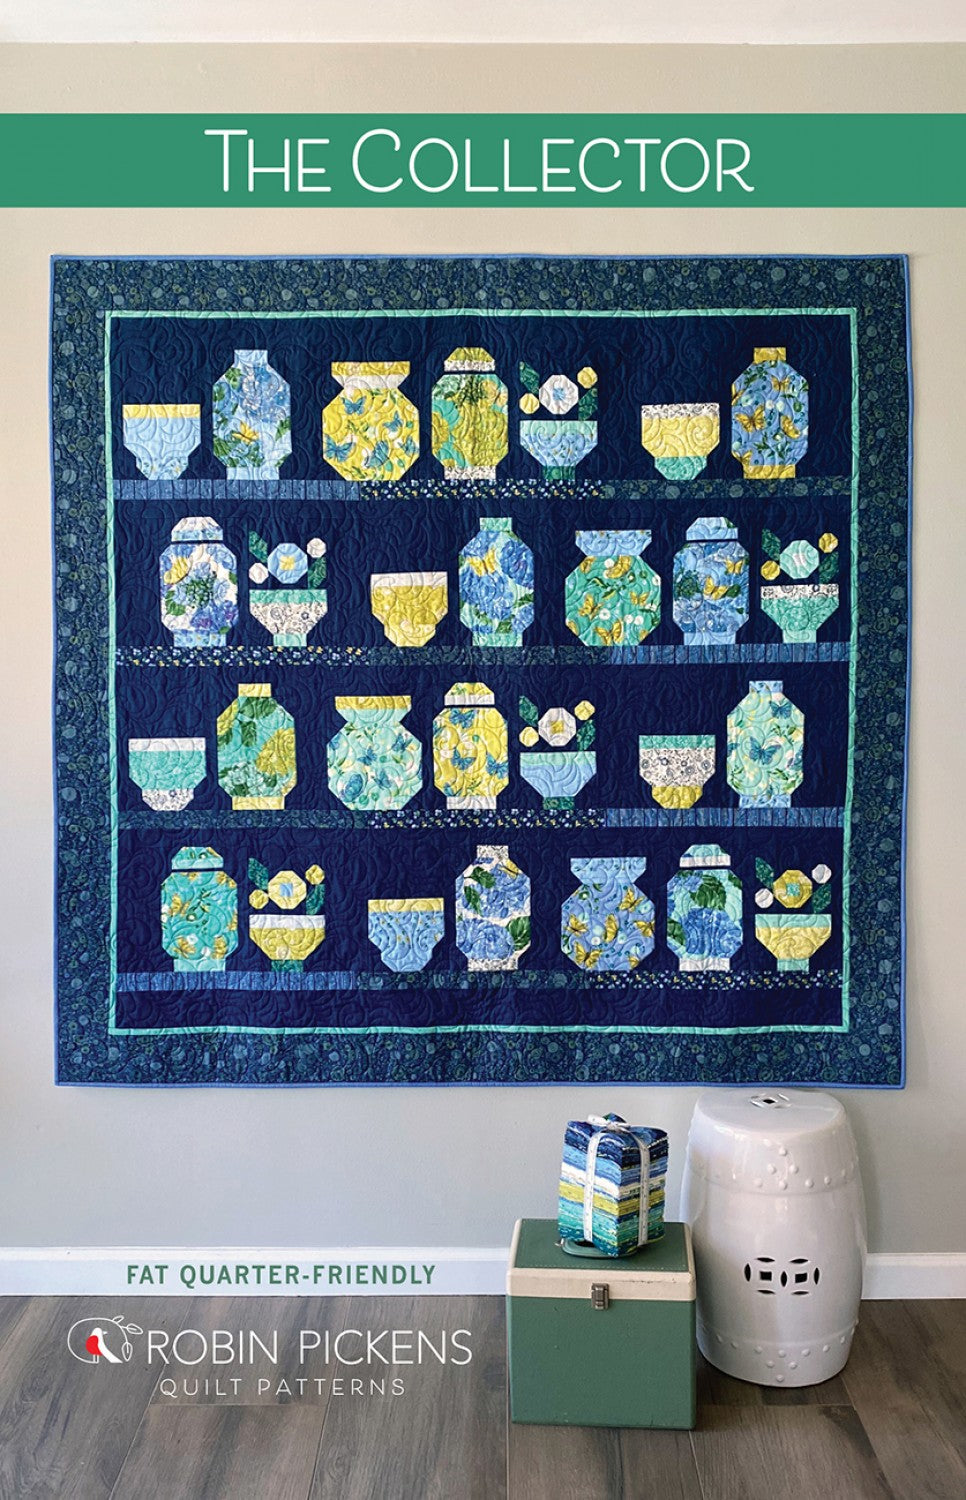 The Collector Quilt Pattern by Robin Pickens